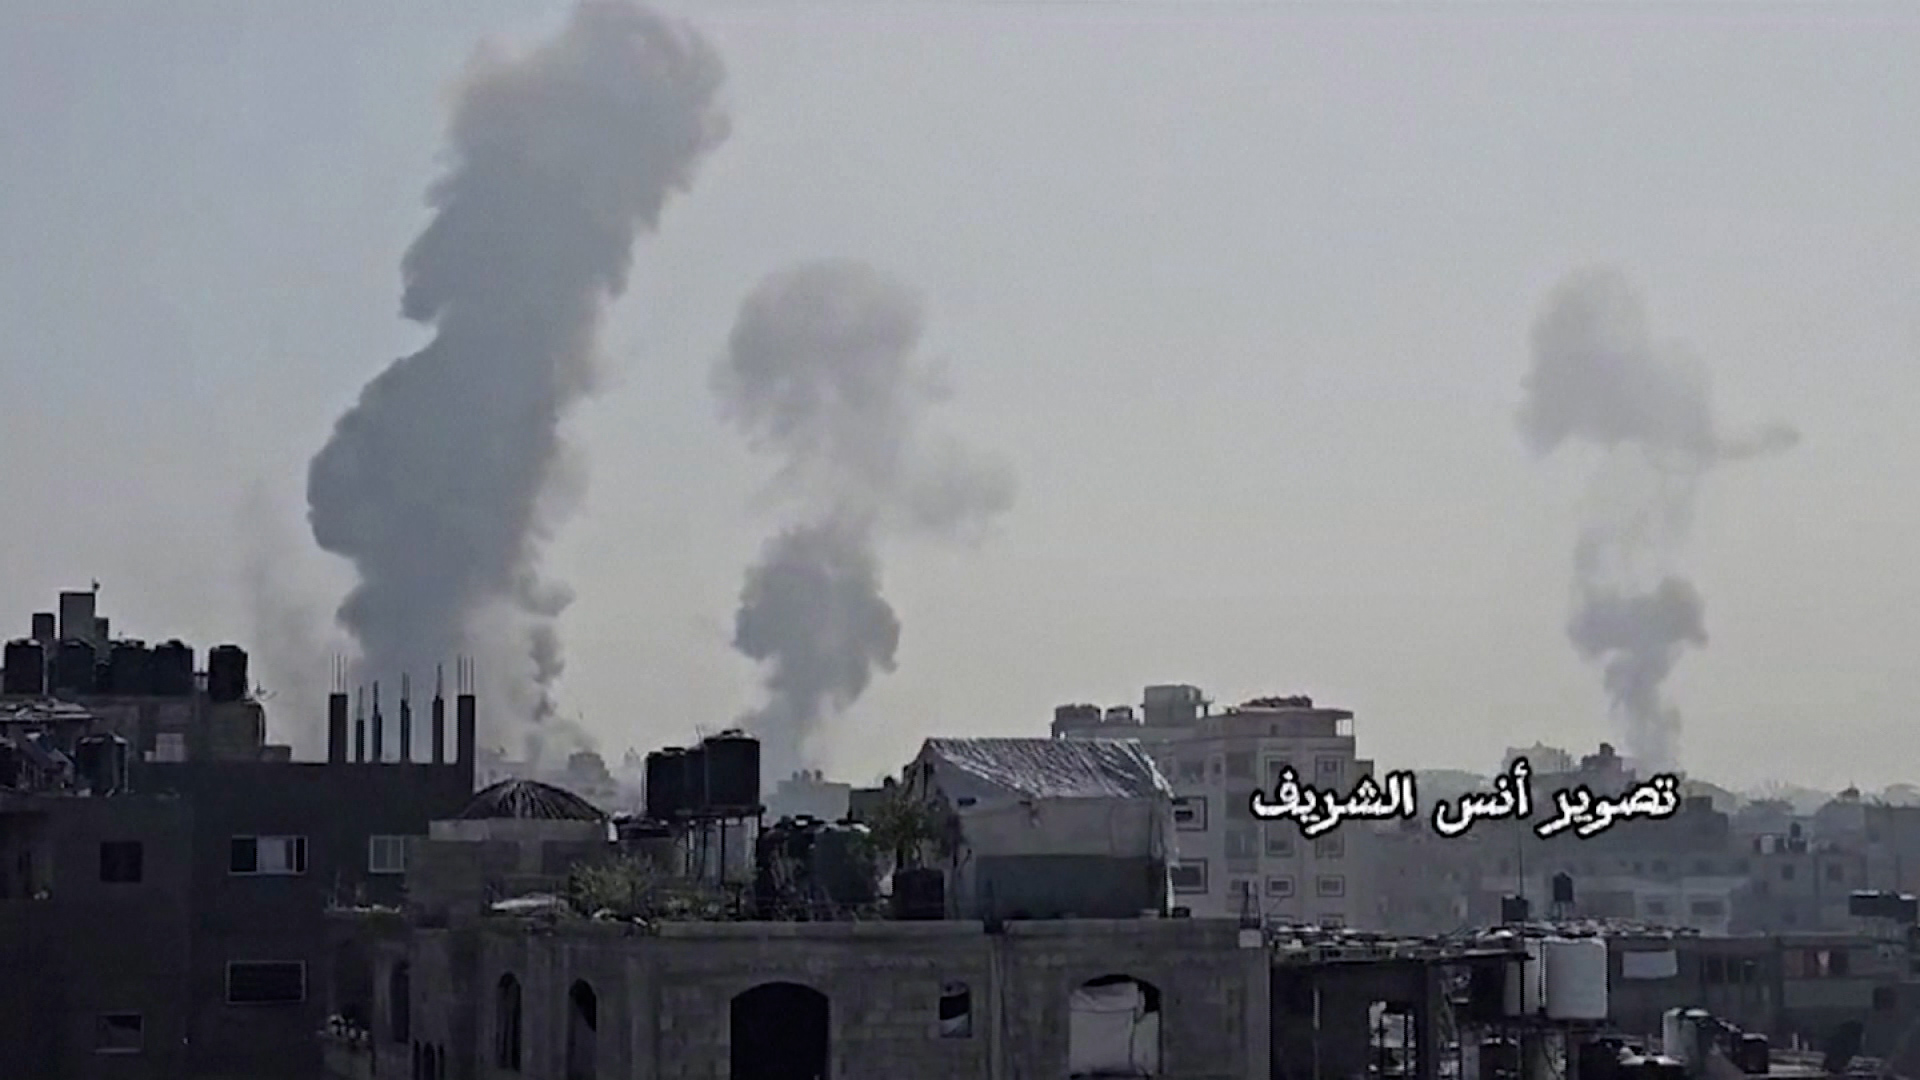 In this still from video obtained by Reuters, smoke fills the air in Jabalya, Gaza, on Sunday, December 3.